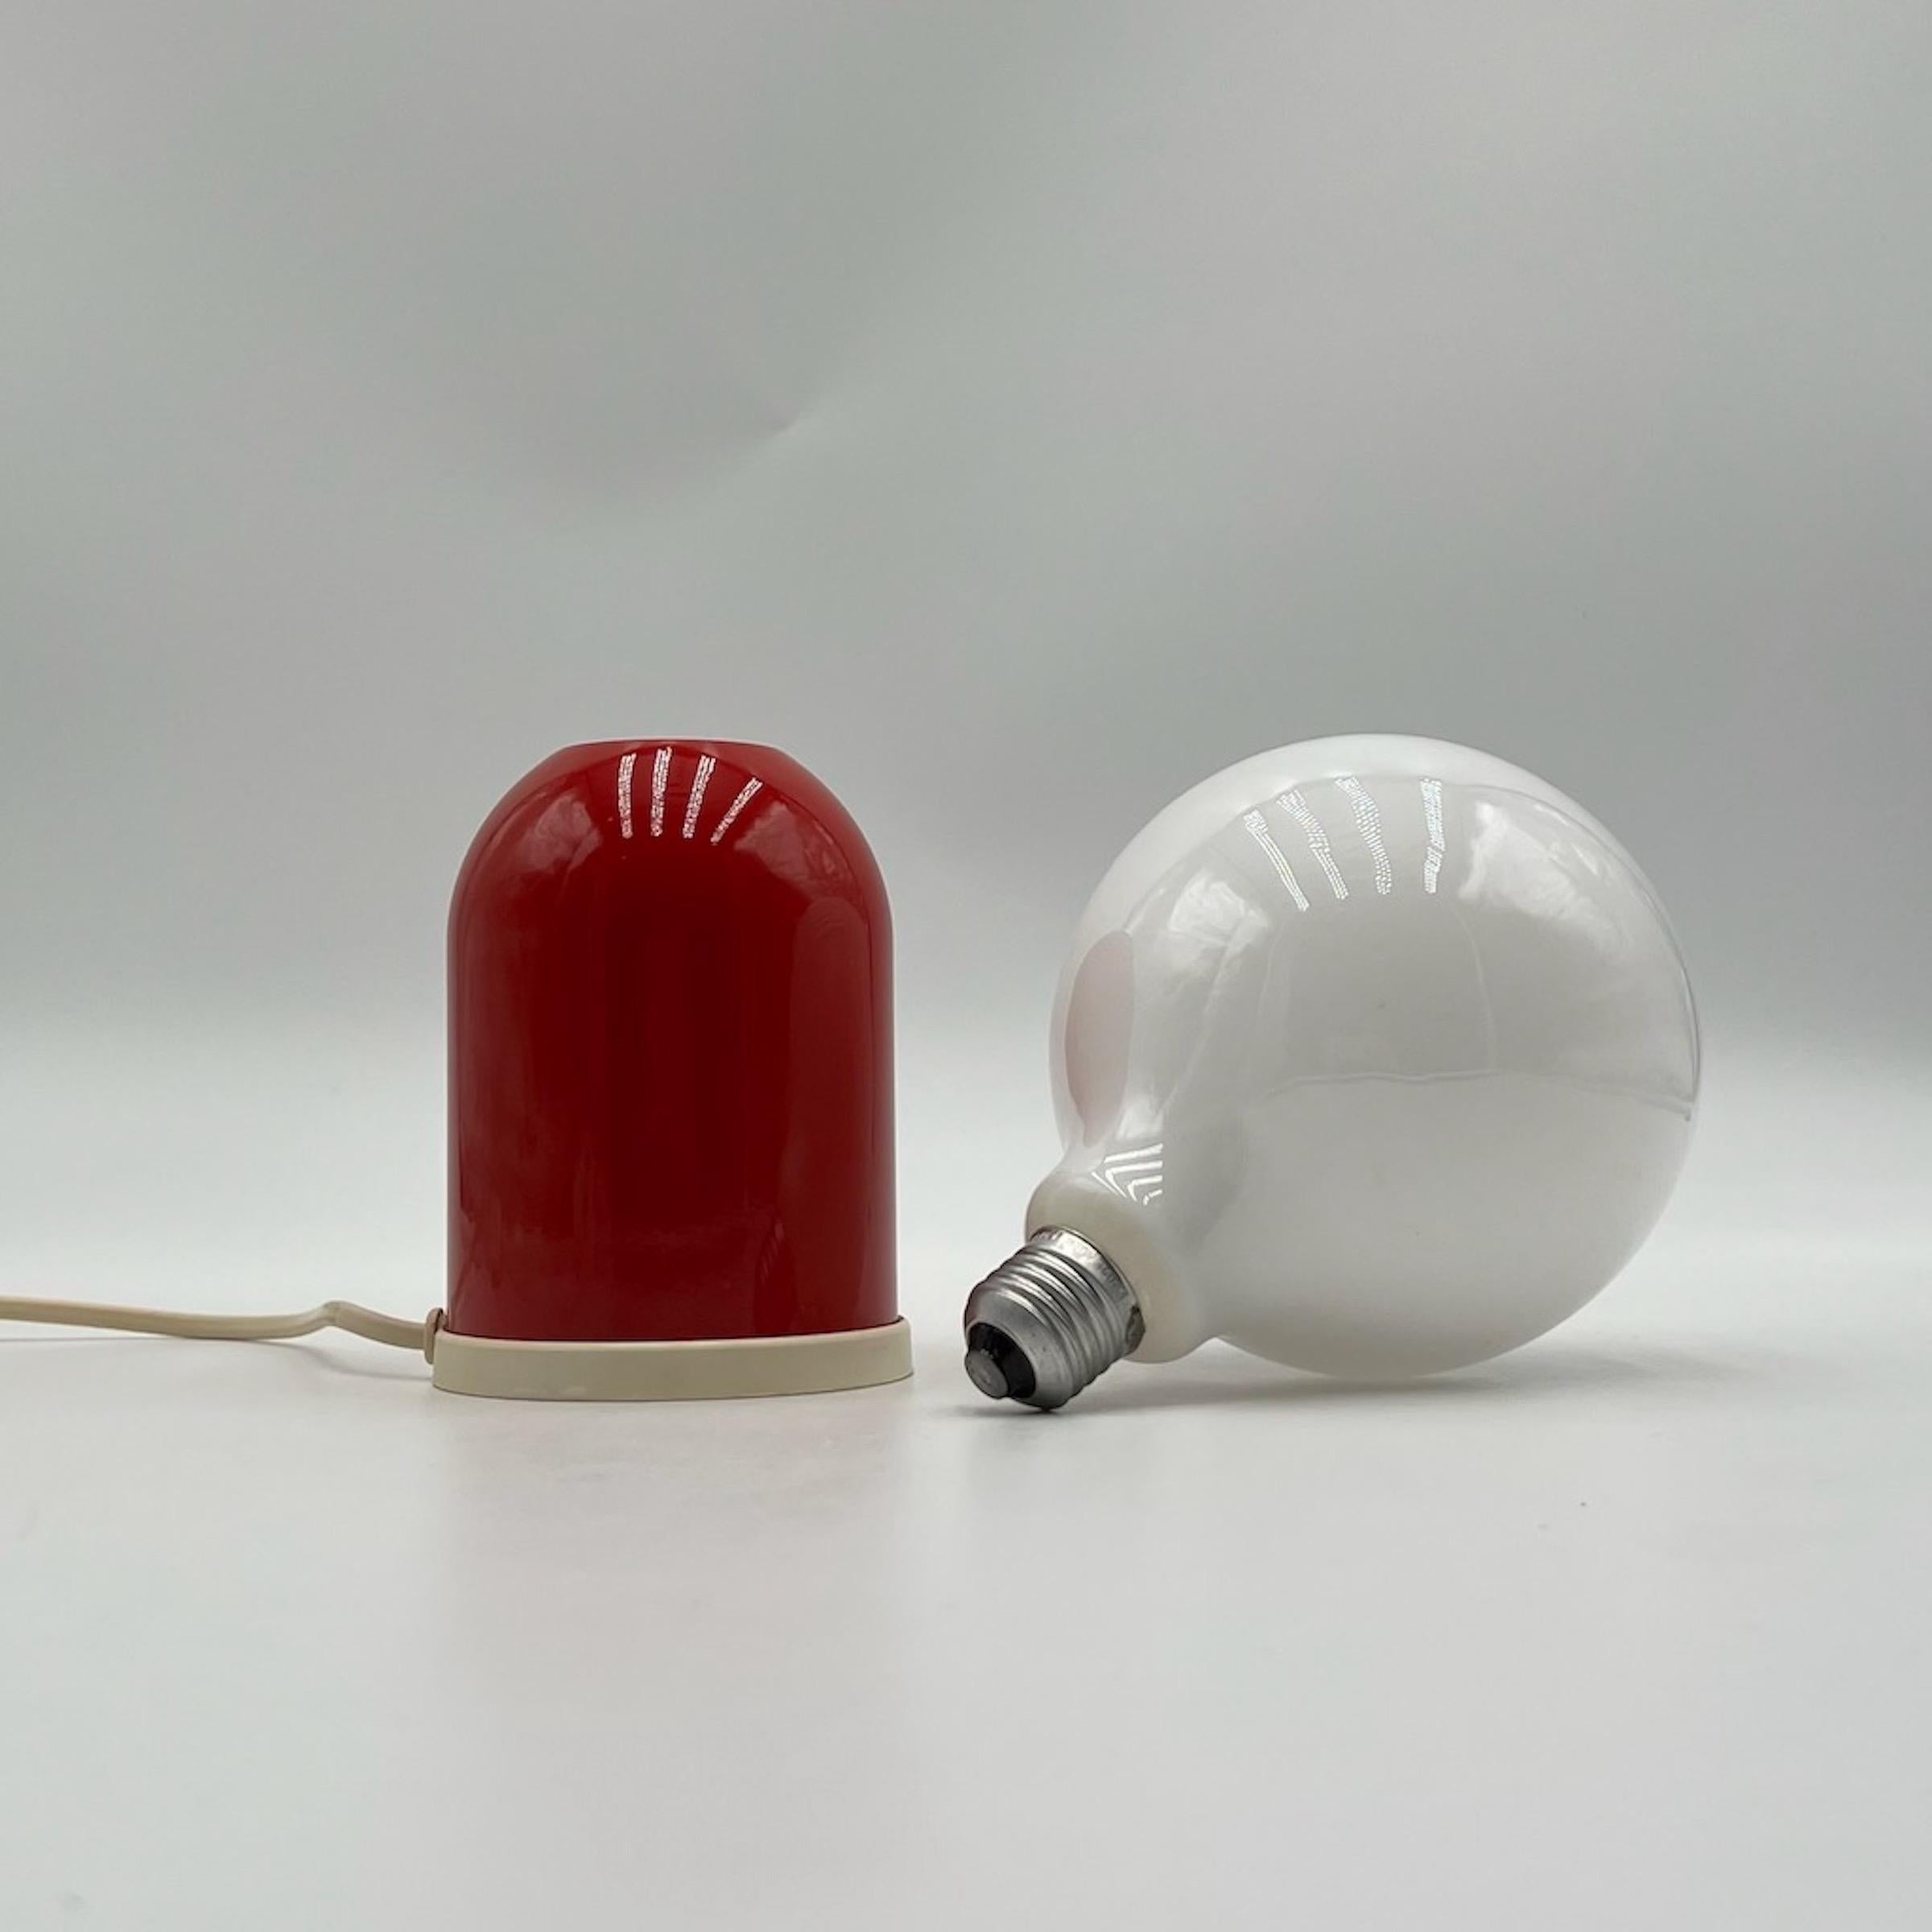 Minimalistic Table Lamp in Lacquered Red Metal by Targetti Sankey, 1980s For Sale 1